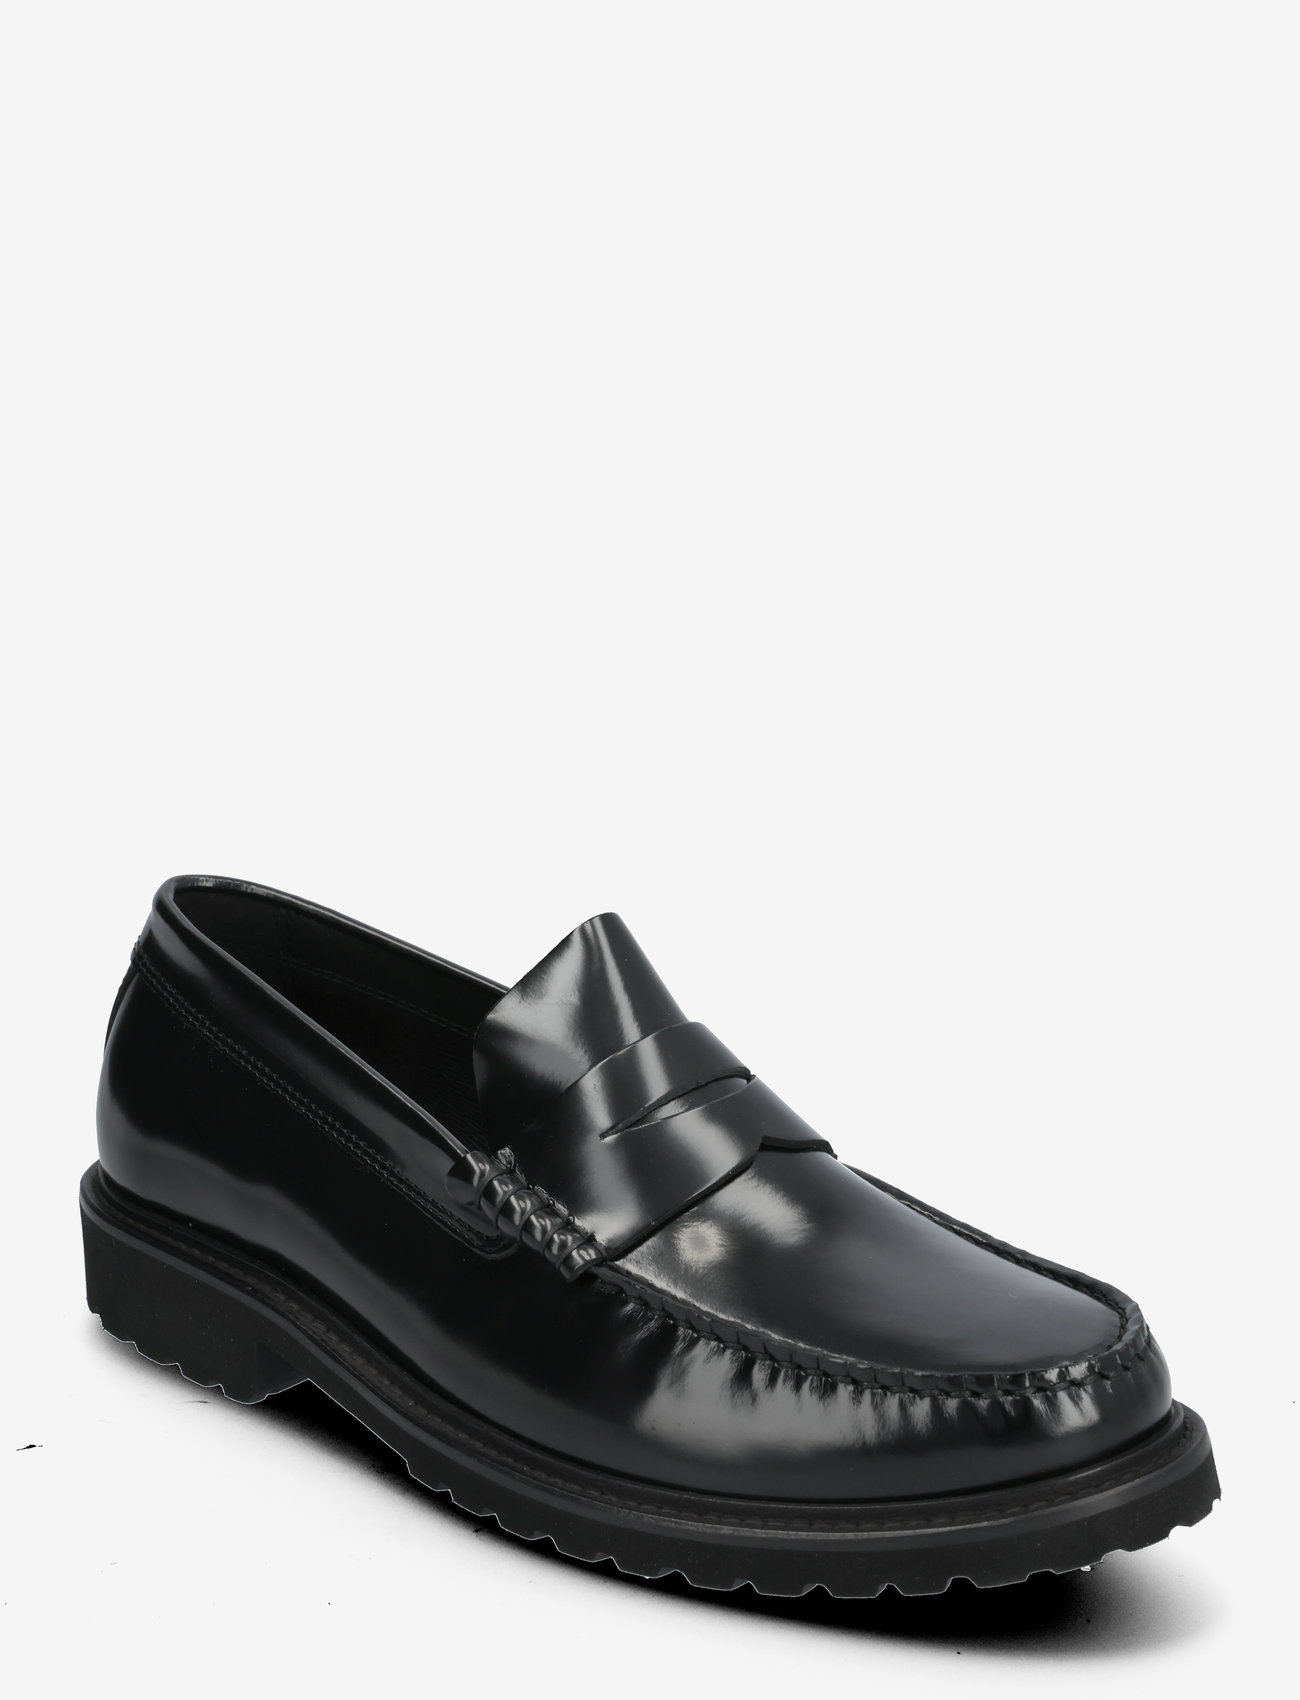 Garment Project - Penny Loafer - Black Polido Leather - spring shoes - black - 0